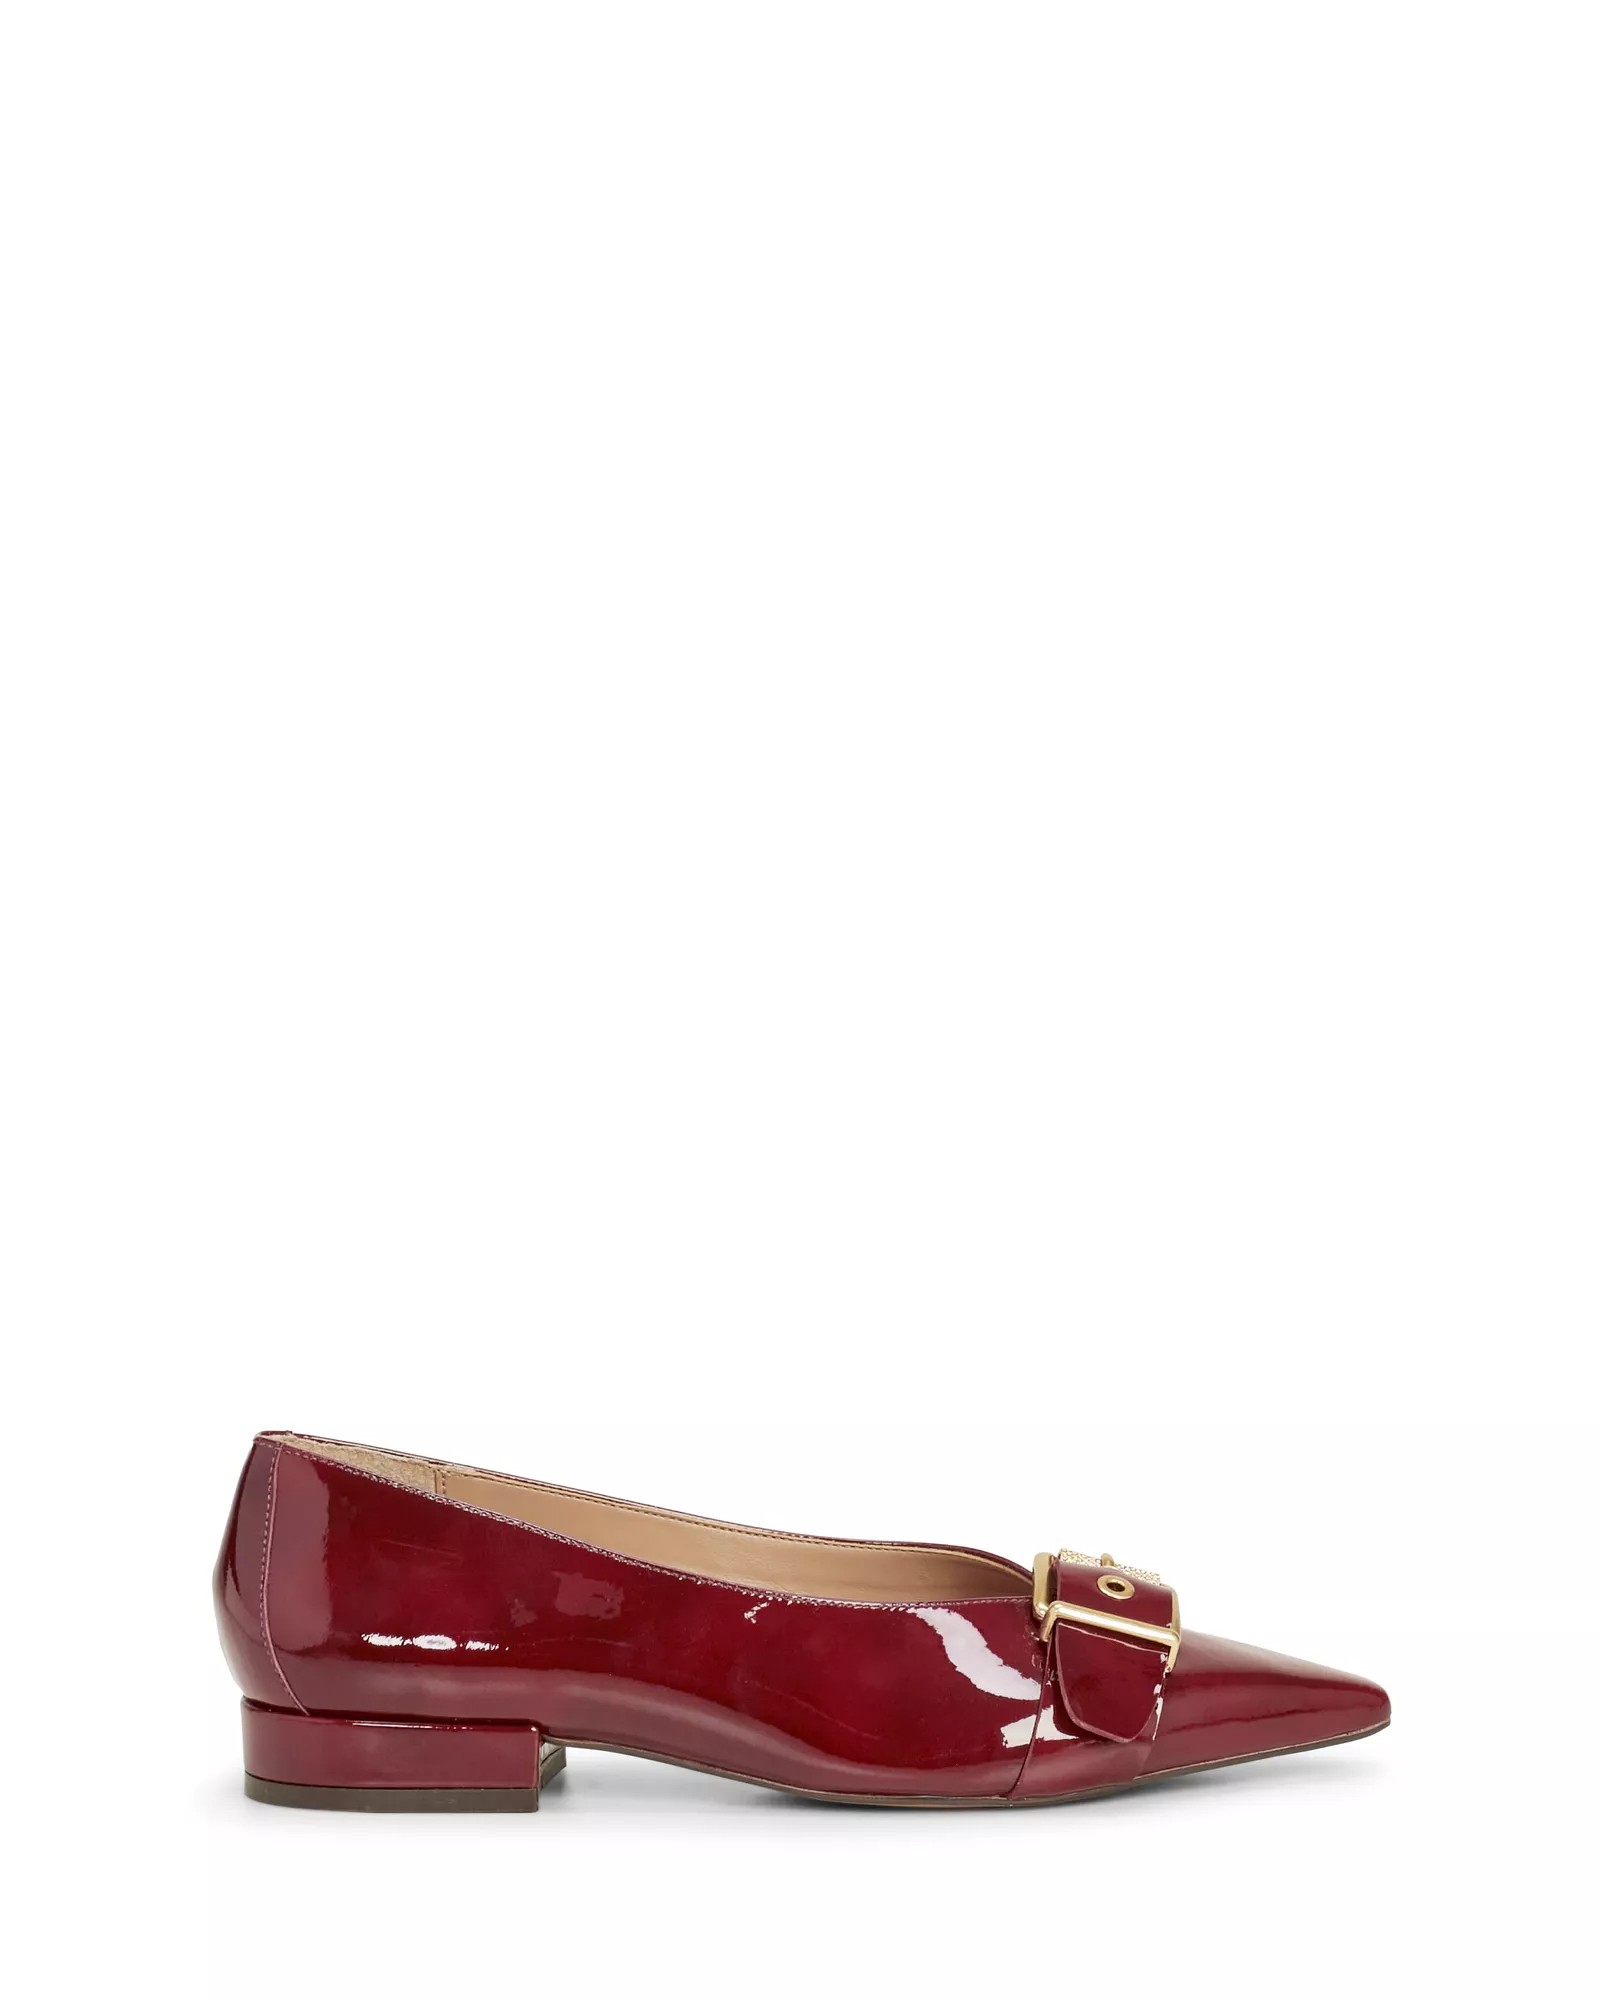 Women's Vince Camuto Megdele Flats Size 9 Red Currant